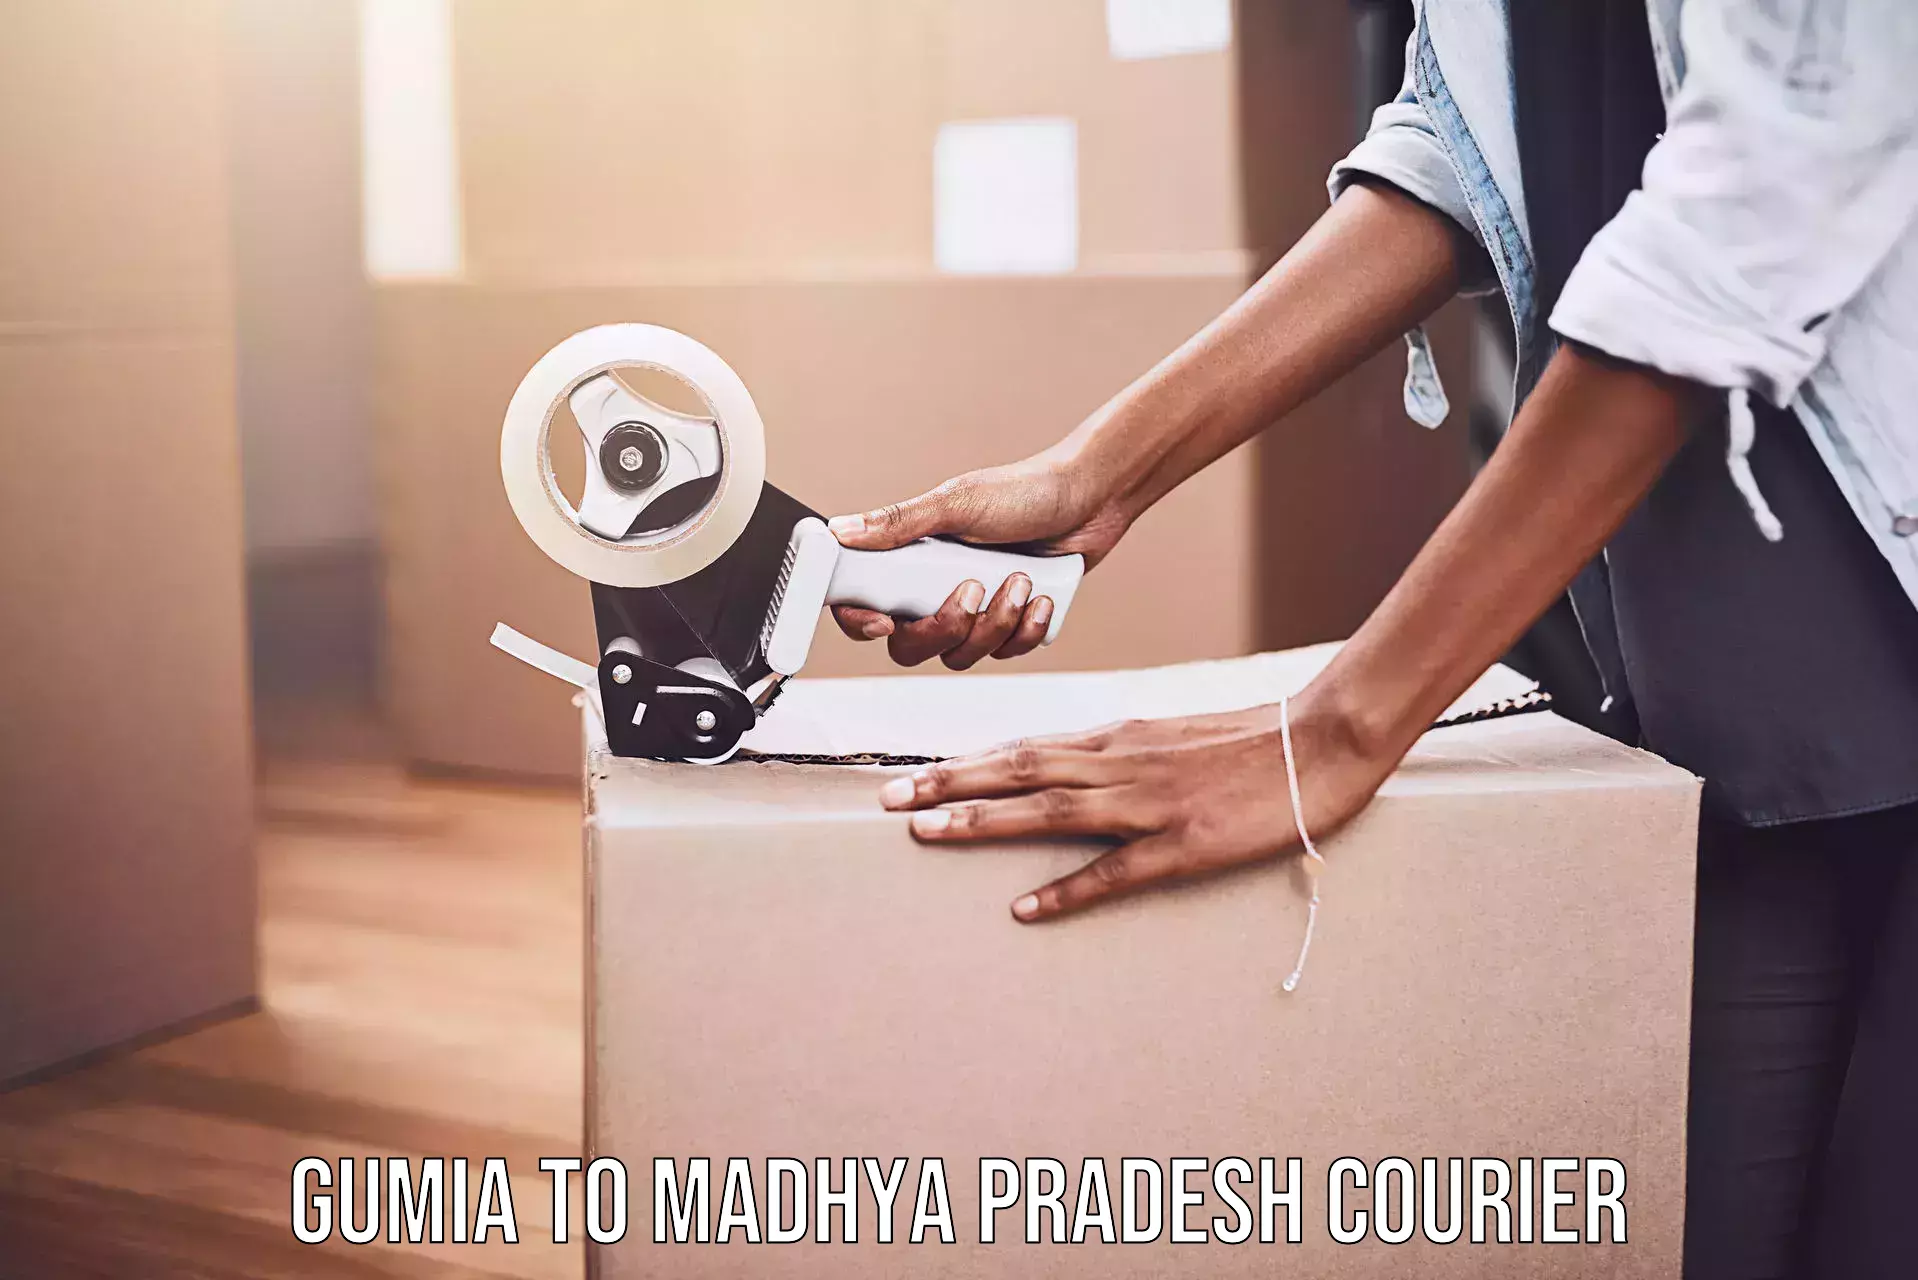 Express delivery capabilities in Gumia to Gwalior